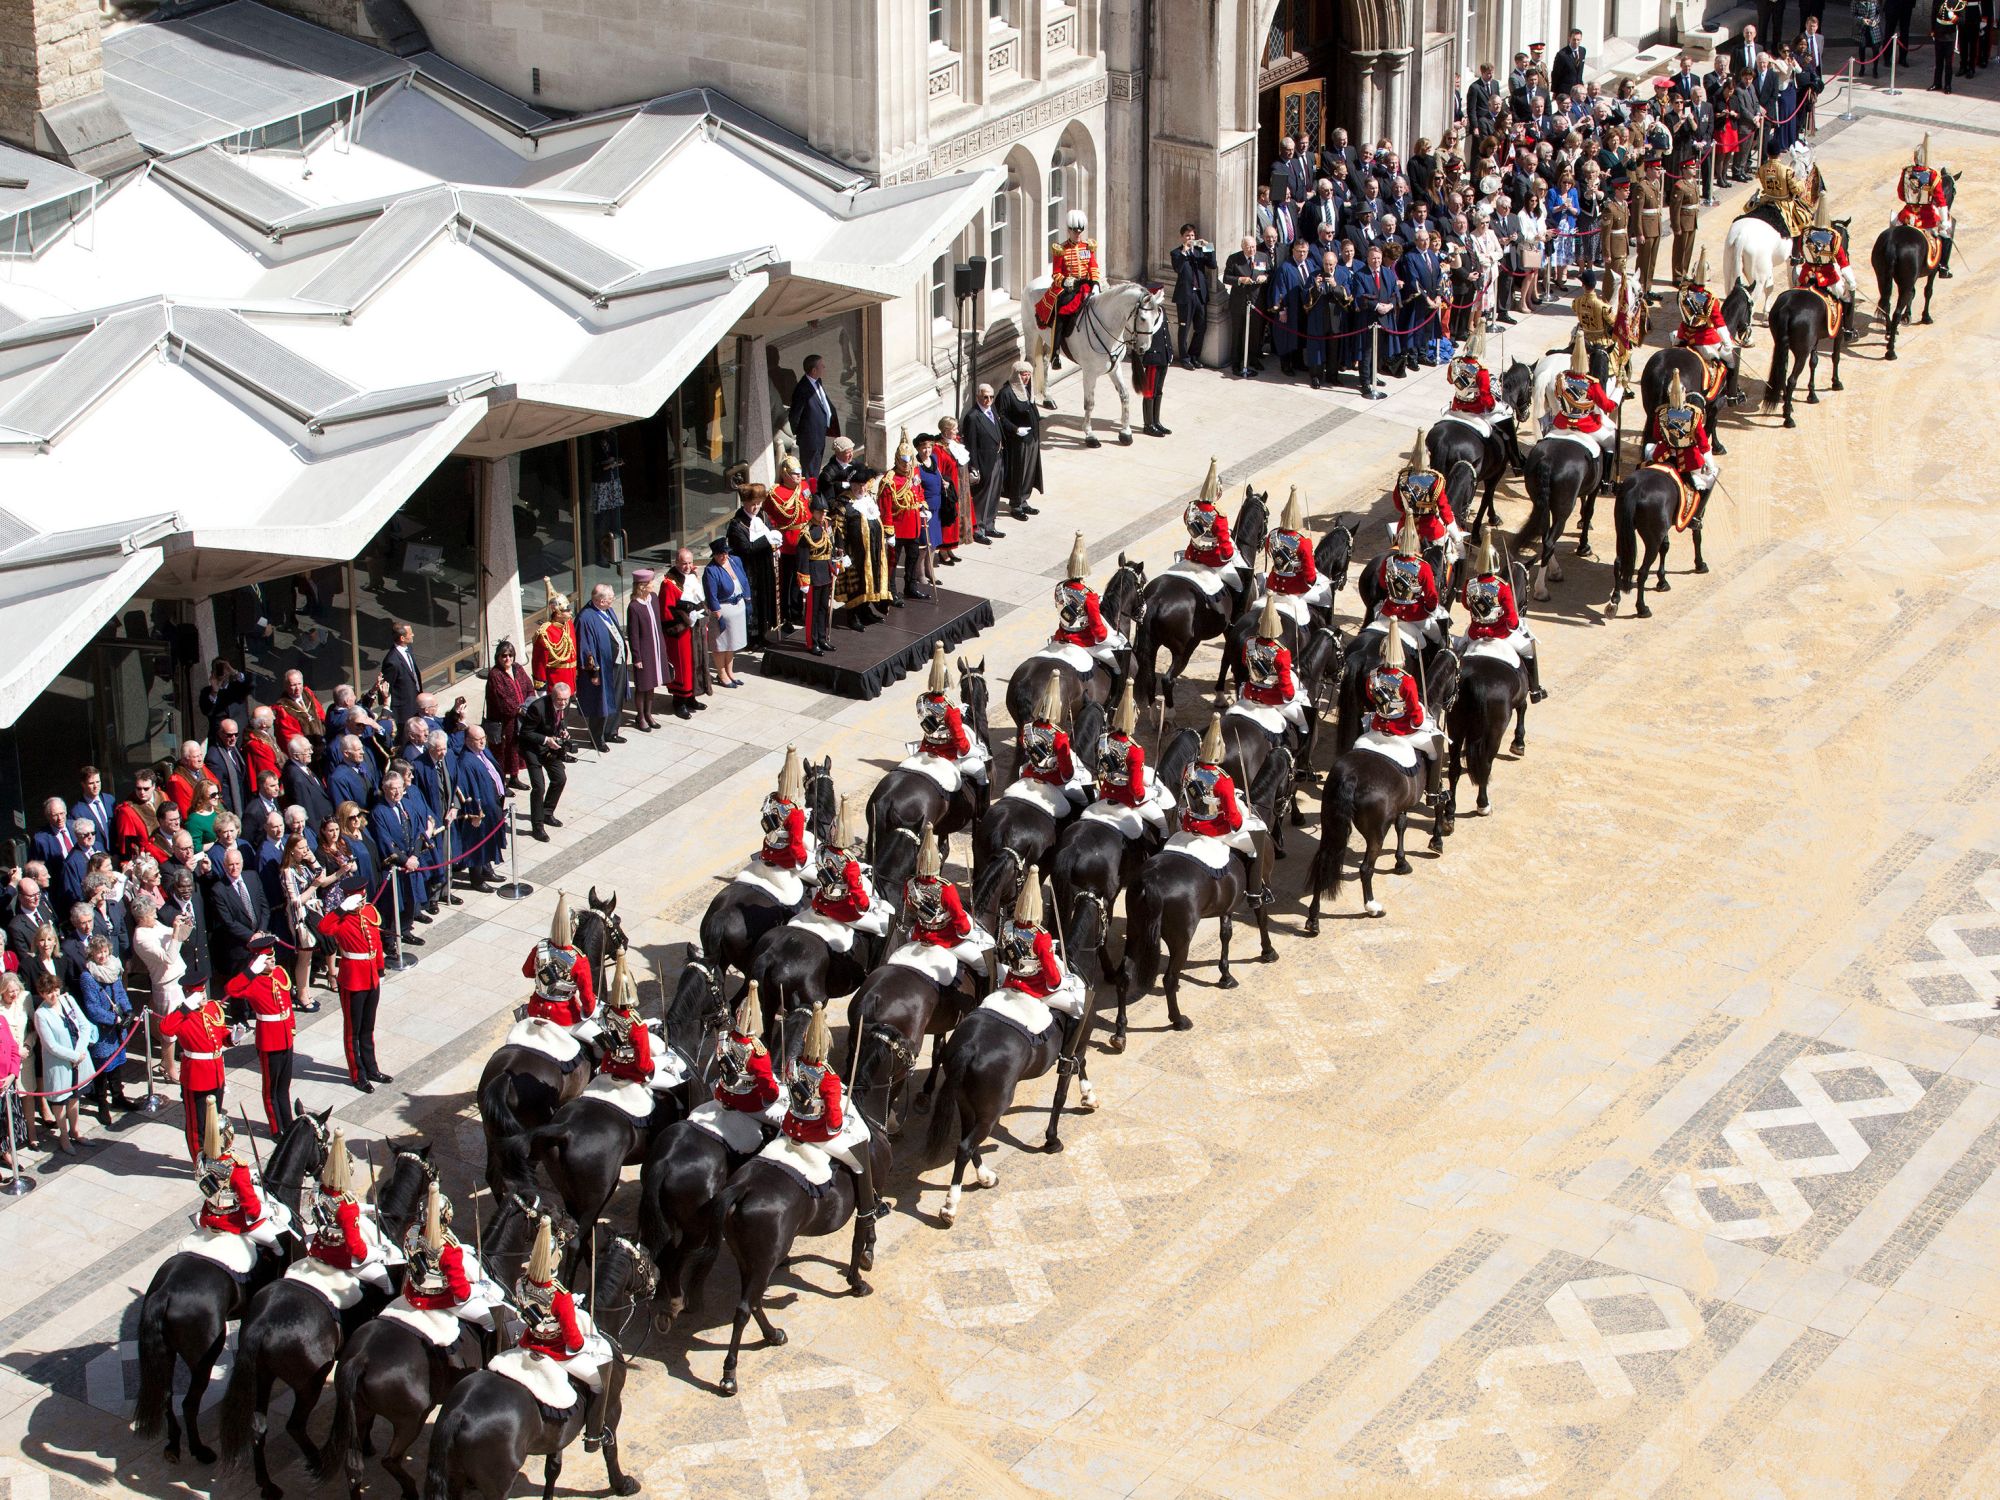 rows of royal guards on horses outside The Guildhall